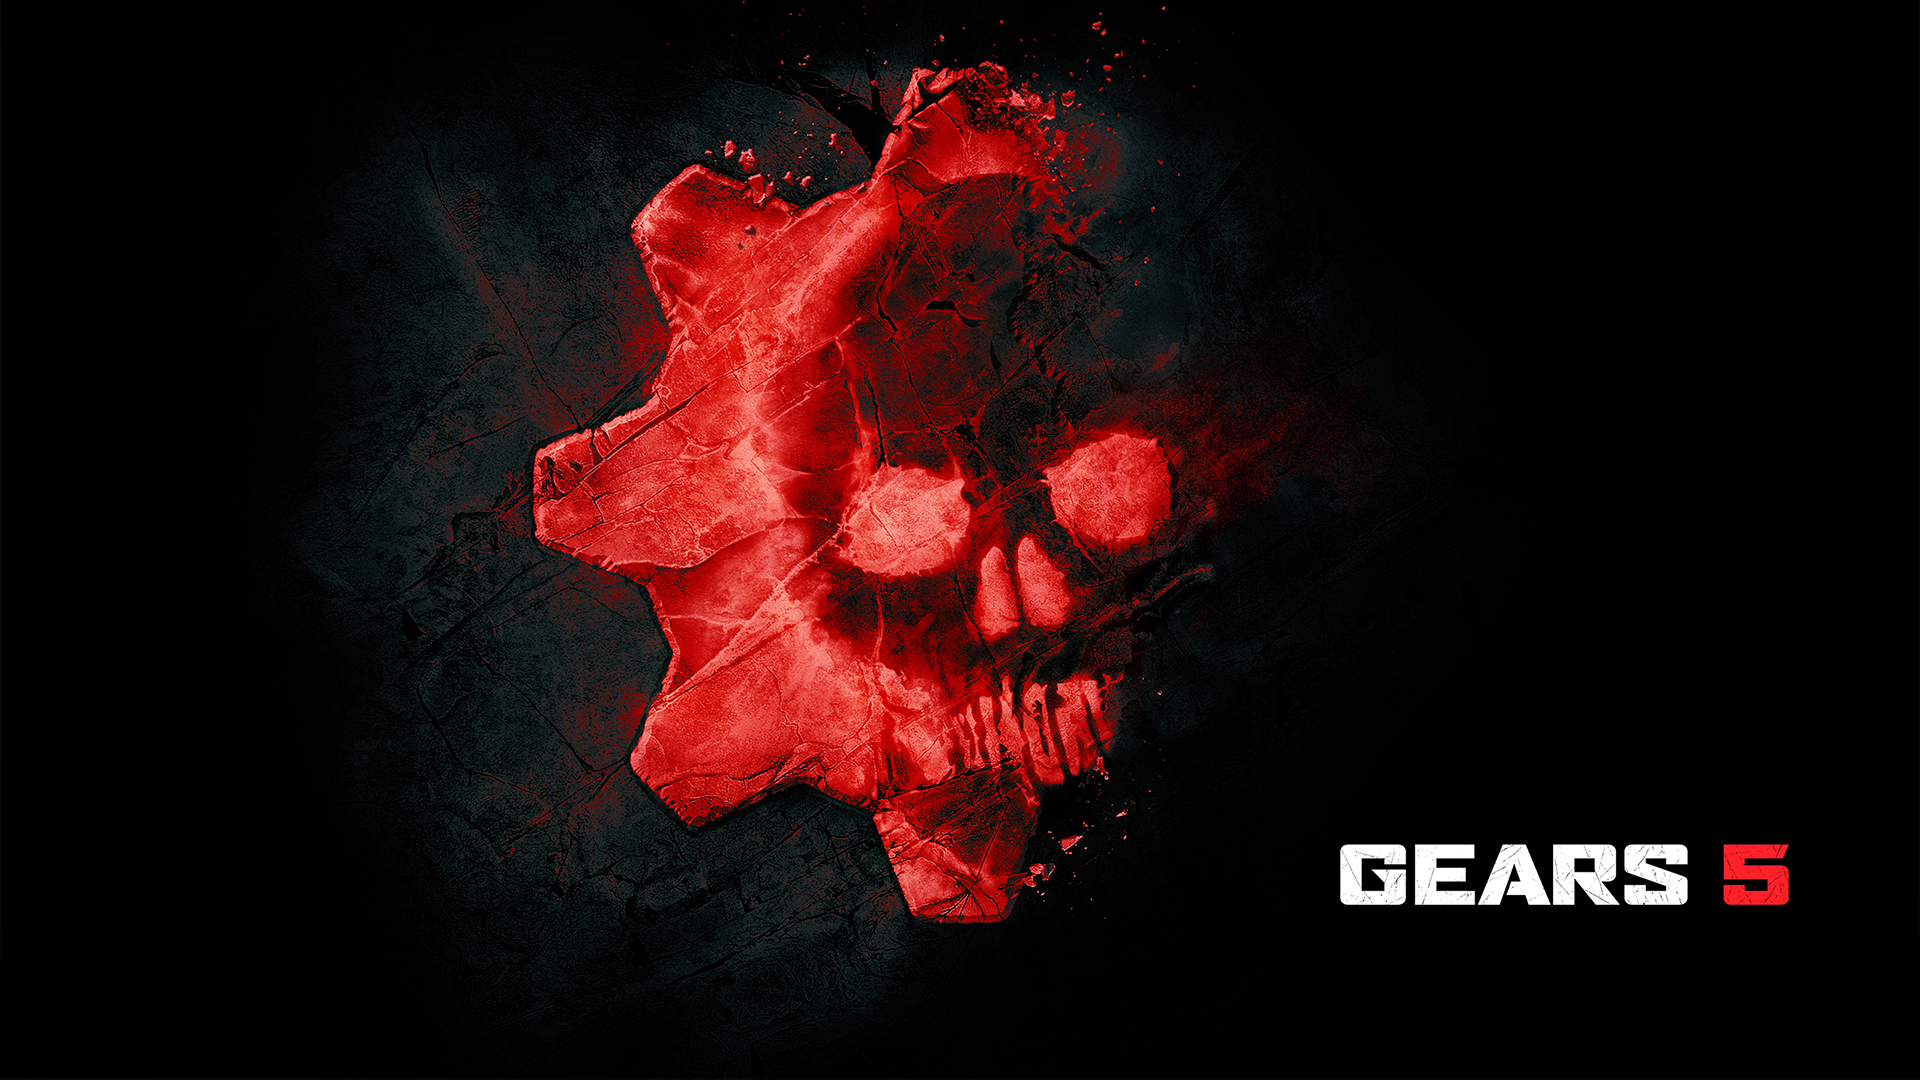 Gears 5 Desktop and Xbox Backgrounds - General Discussion - Gears Forums